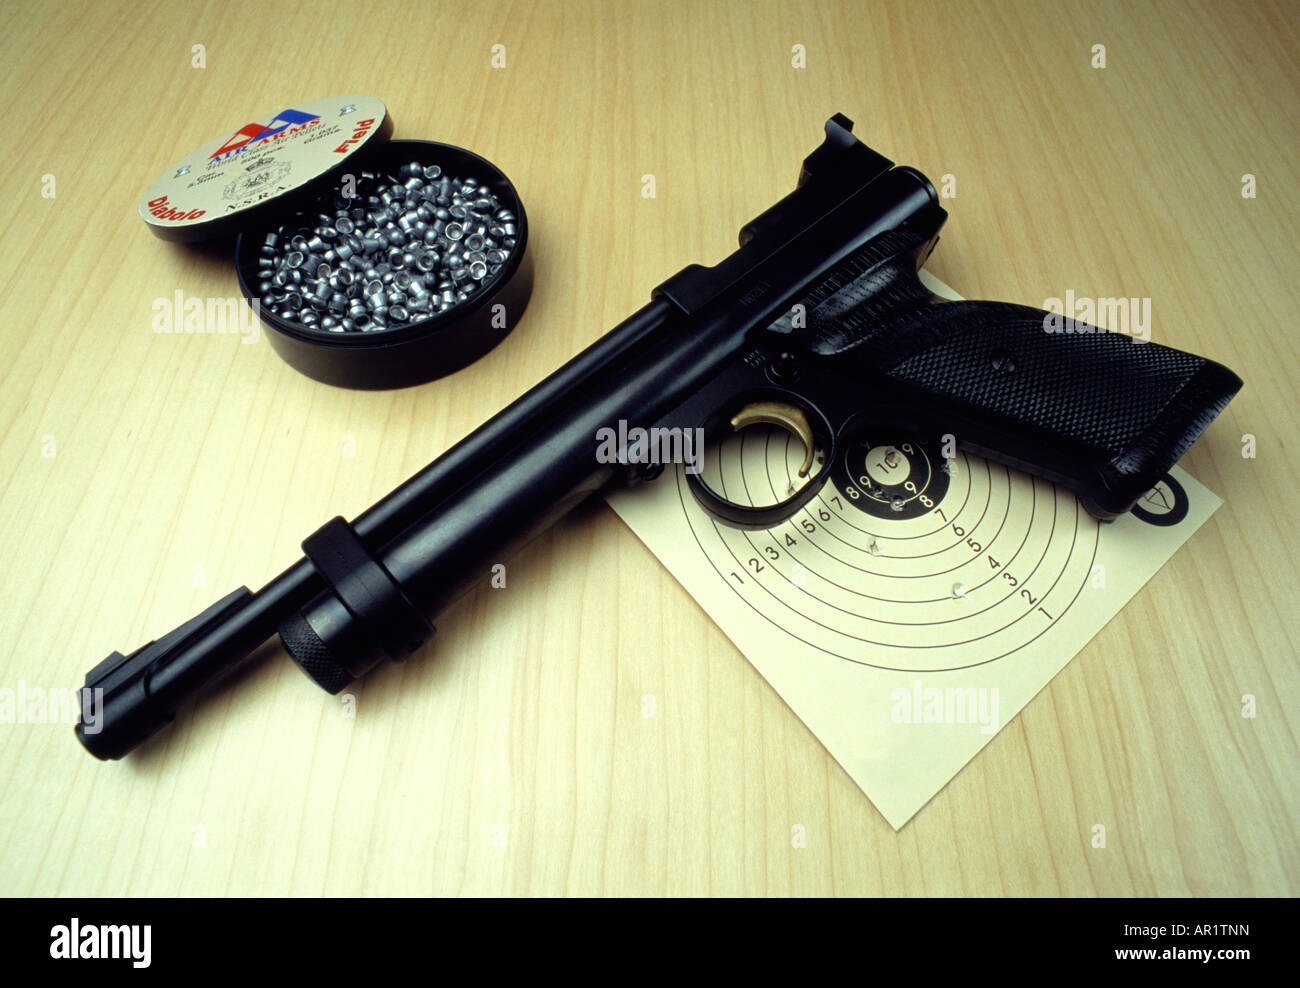 Airgun ammo and target. Stock Photo